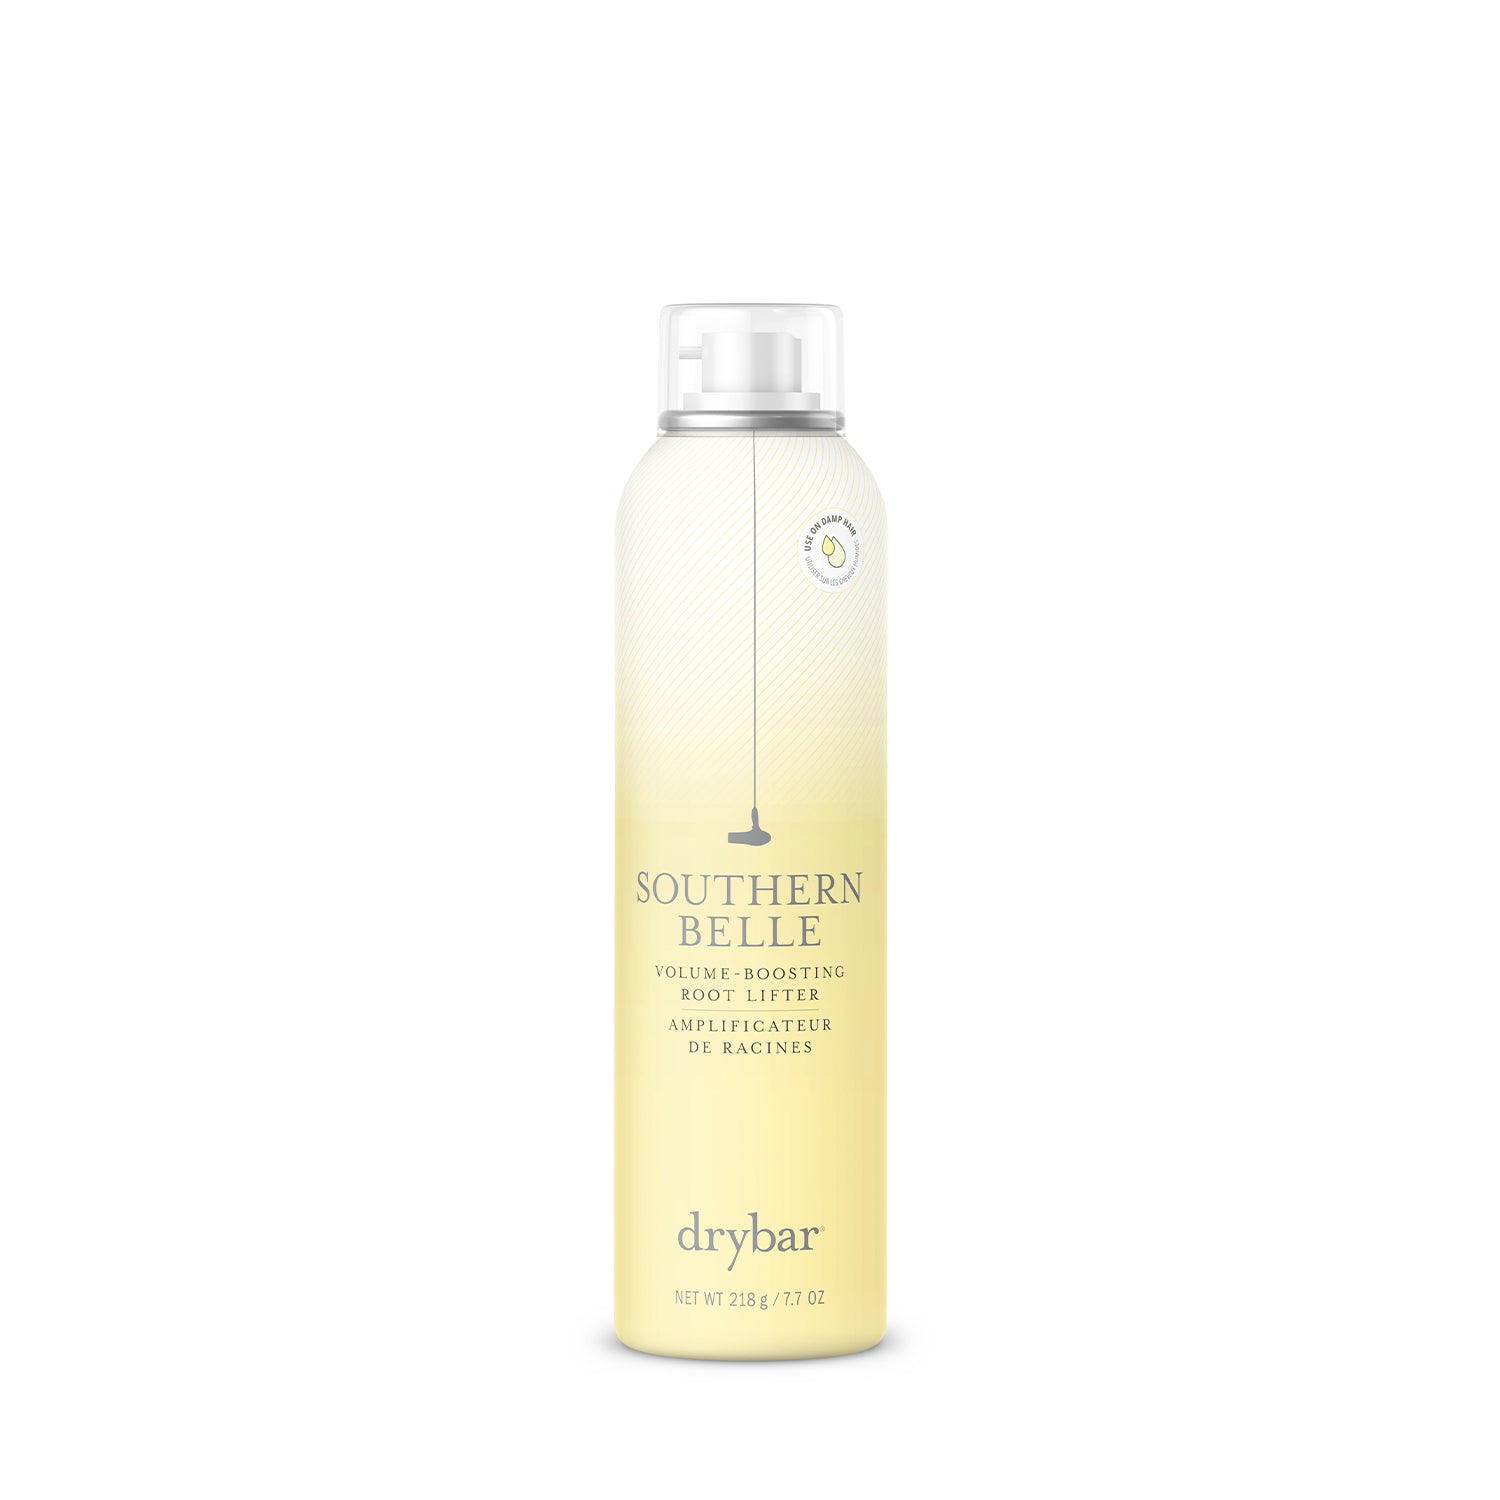 SOUTHERN BELLE VOLUME-BOOSTING ROOT LIFTER